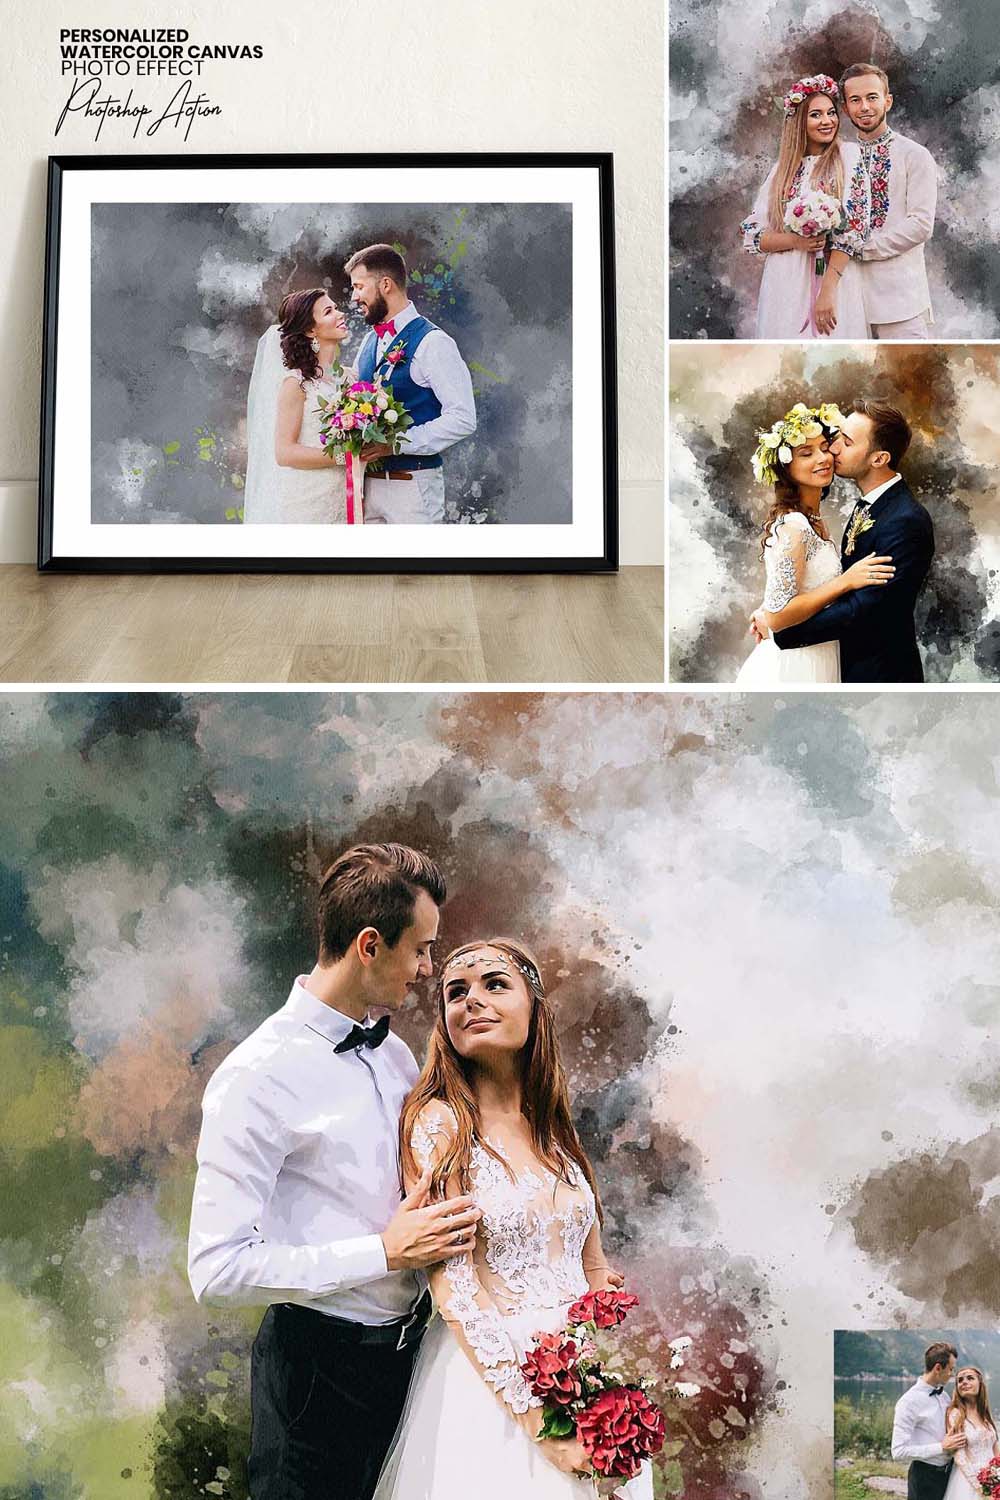 Personalized Watercolor Canvas pinterest preview image.